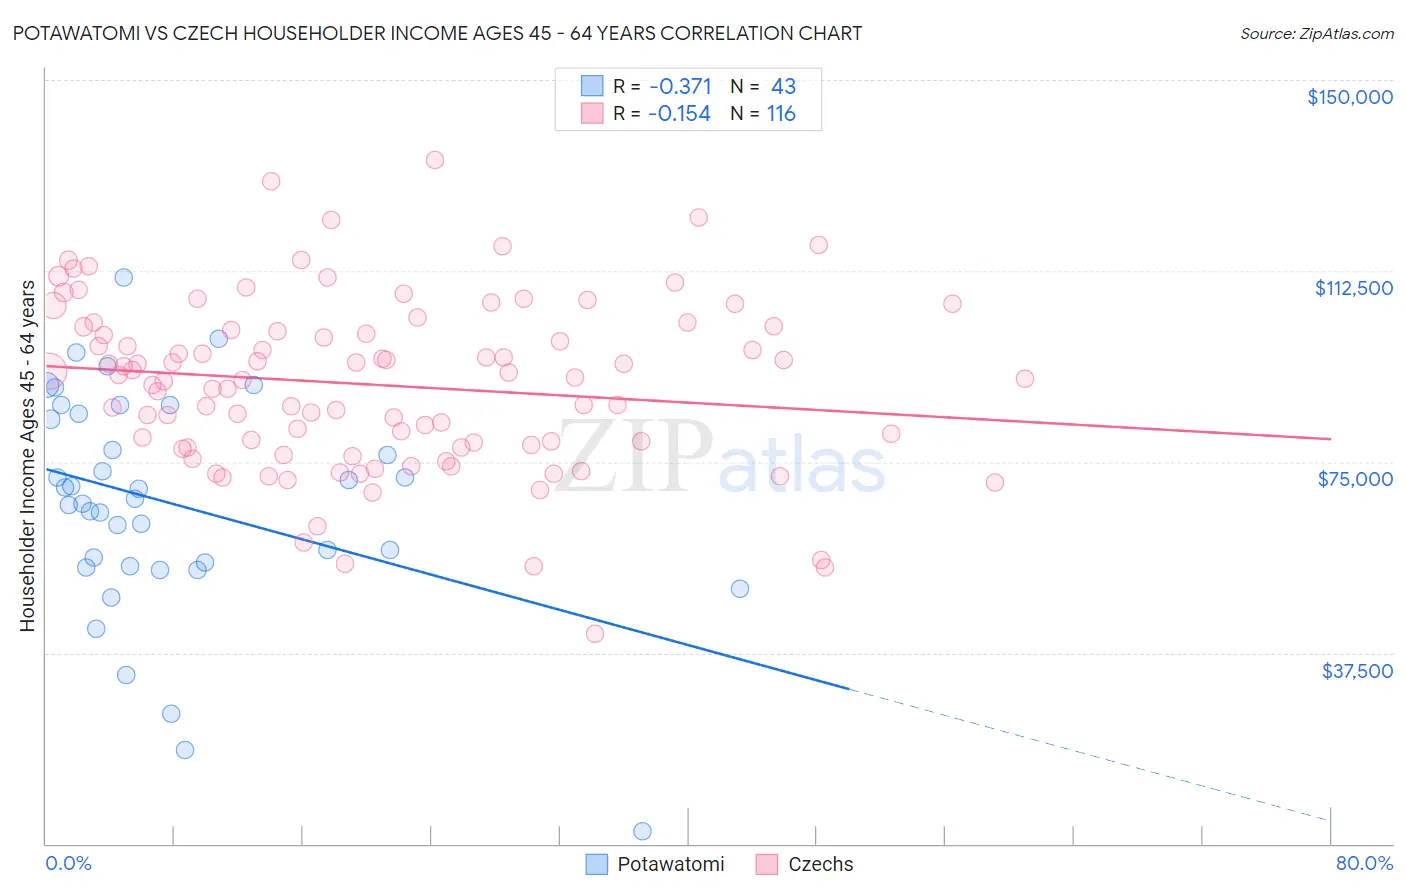 Potawatomi vs Czech Householder Income Ages 45 - 64 years